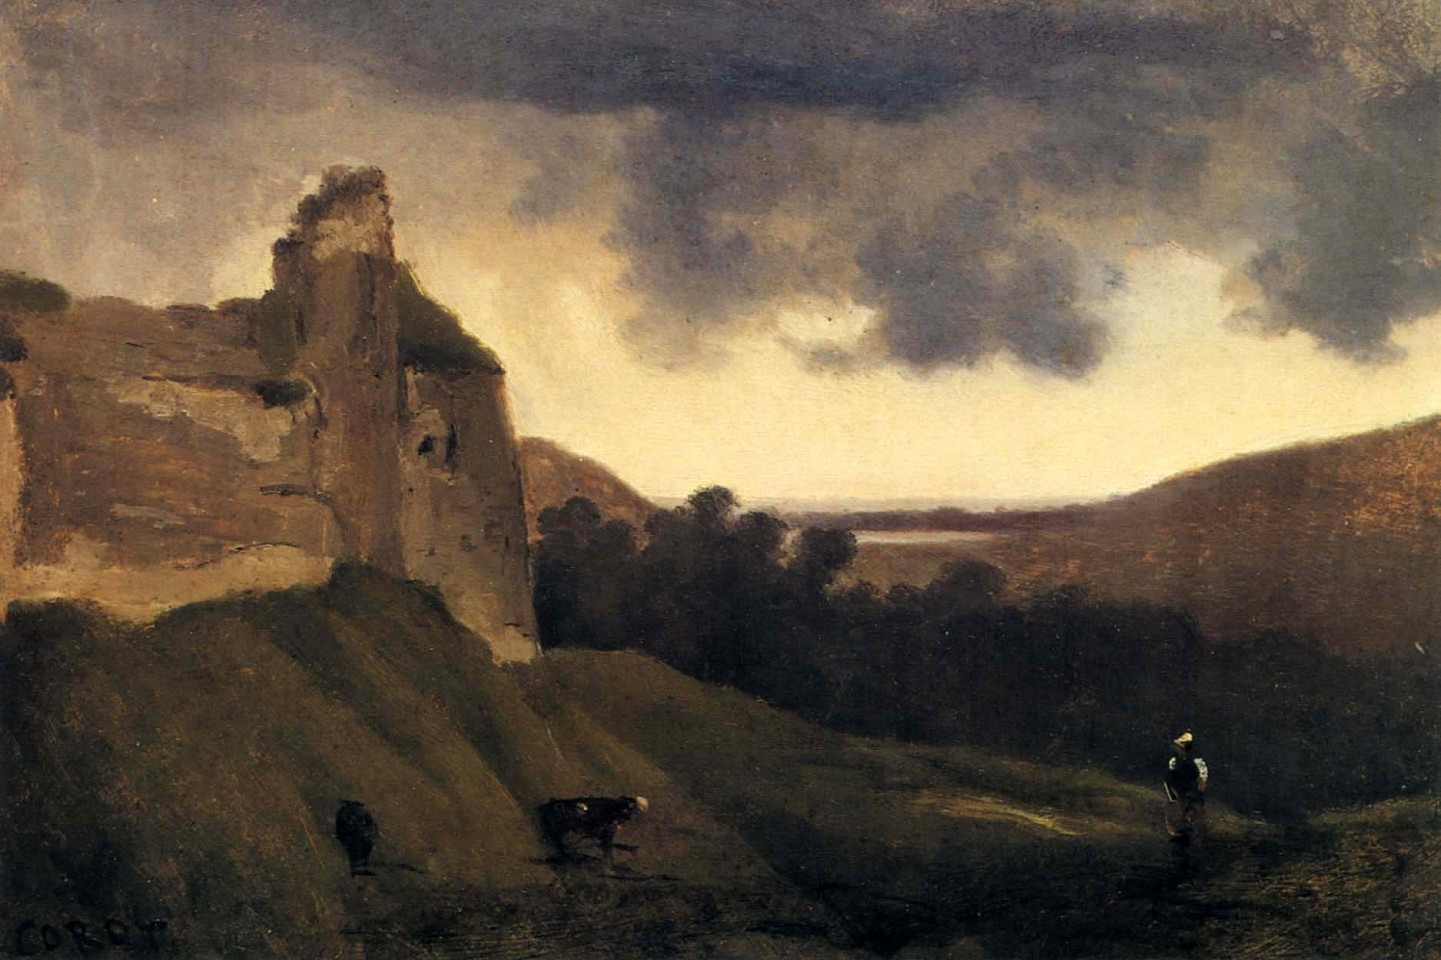 Jean Baptiste Camille Corot, Argues-Ruines du Chateau, 1828-30
Oil on canvas, 8 1/4 x 12 1/4 in. (21 x 31.1 cm)
COR-005-PA